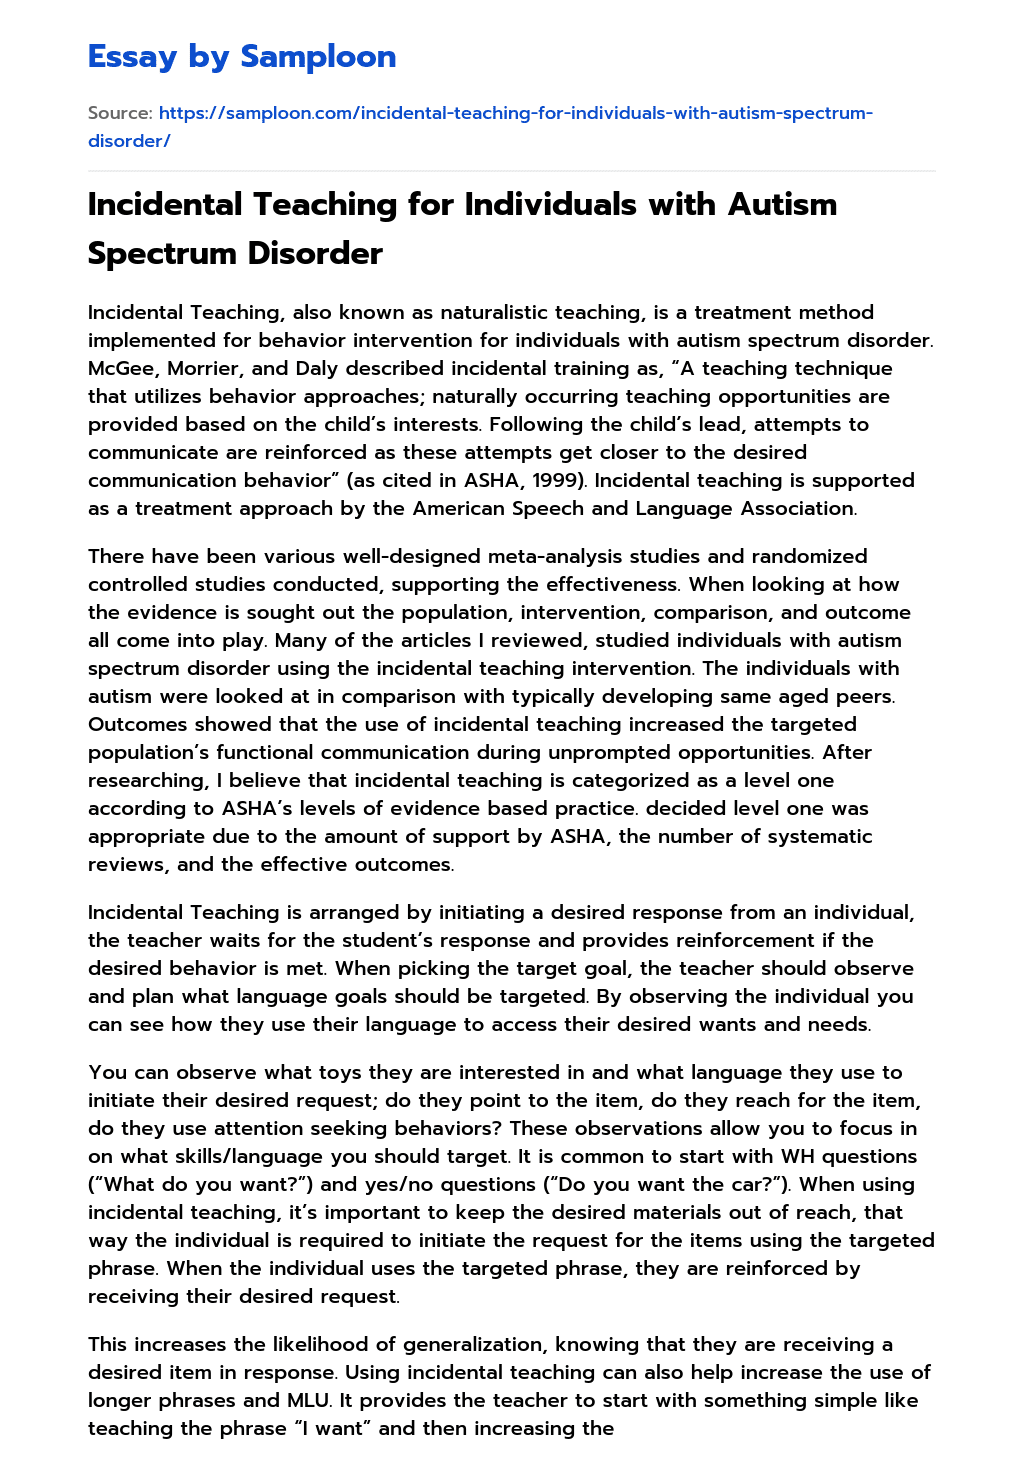 Incidental Teaching for Individuals with Autism Spectrum Disorder essay